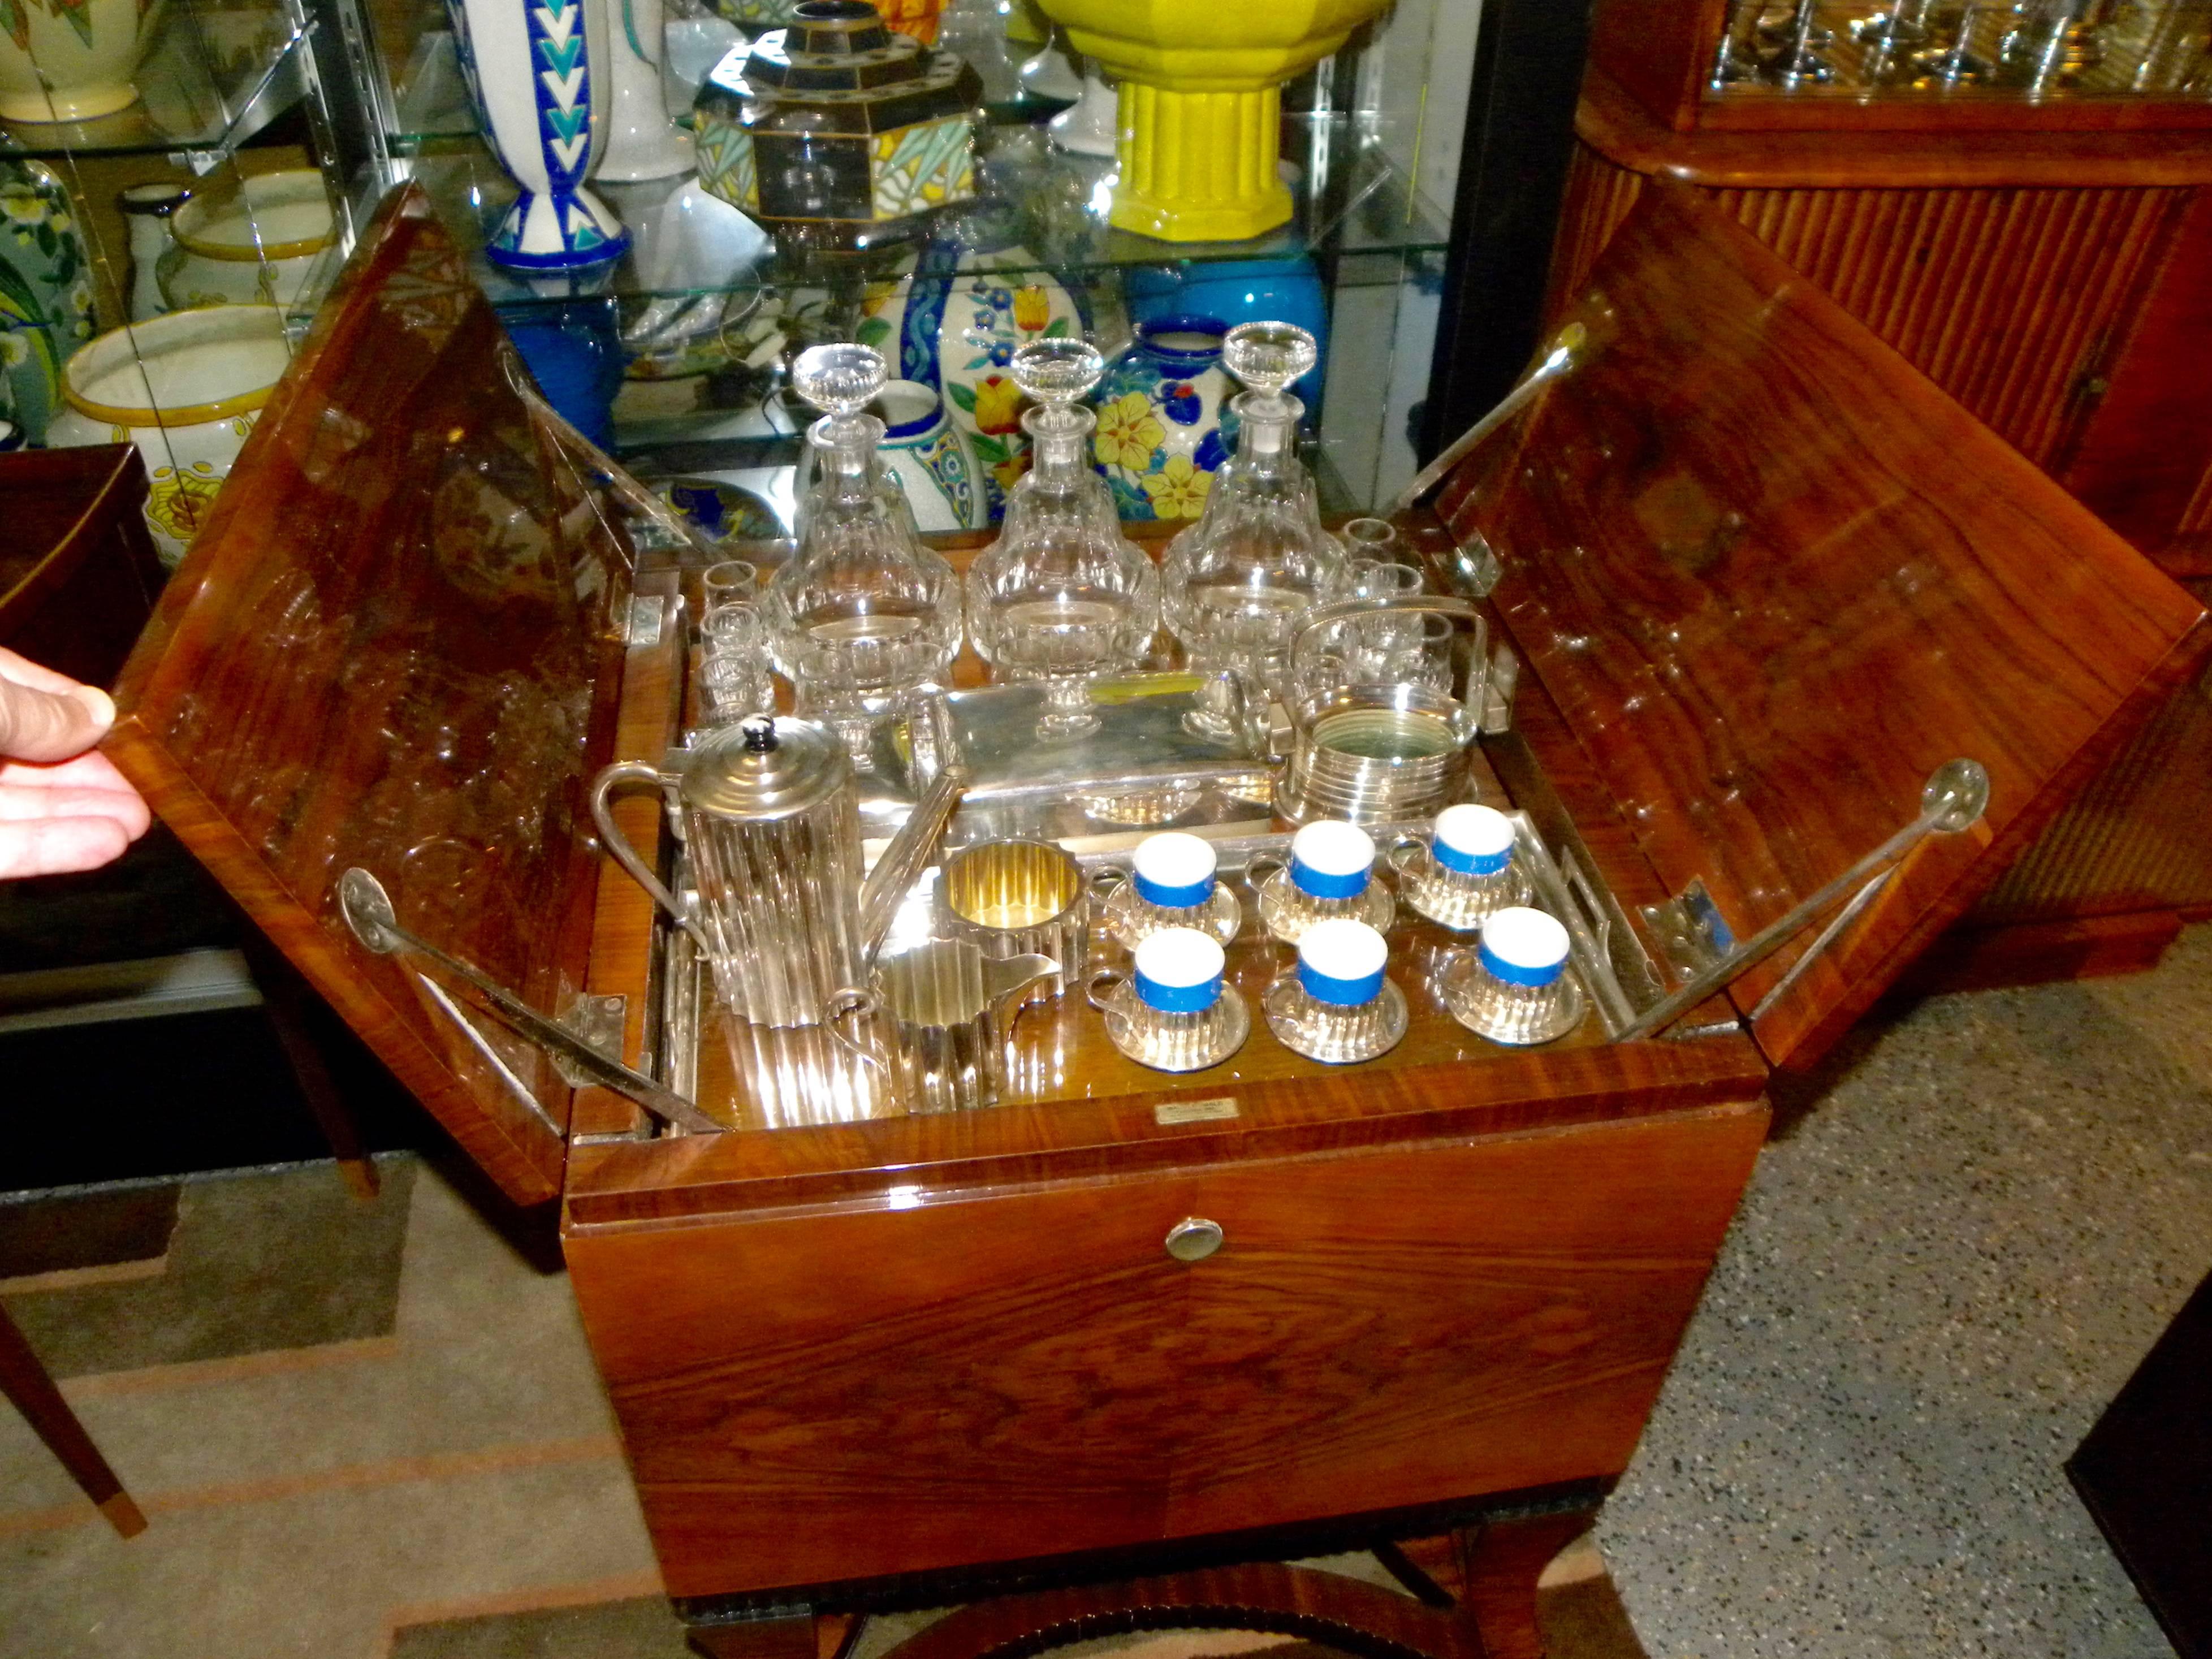 This complete and elegant French style Art Deco pop up bar has absolutely everything tucked inside ready to be offered up with a presentation of sheer sophistication. This original piece from Argentina was sold by Walser Wald, a prominent jeweler